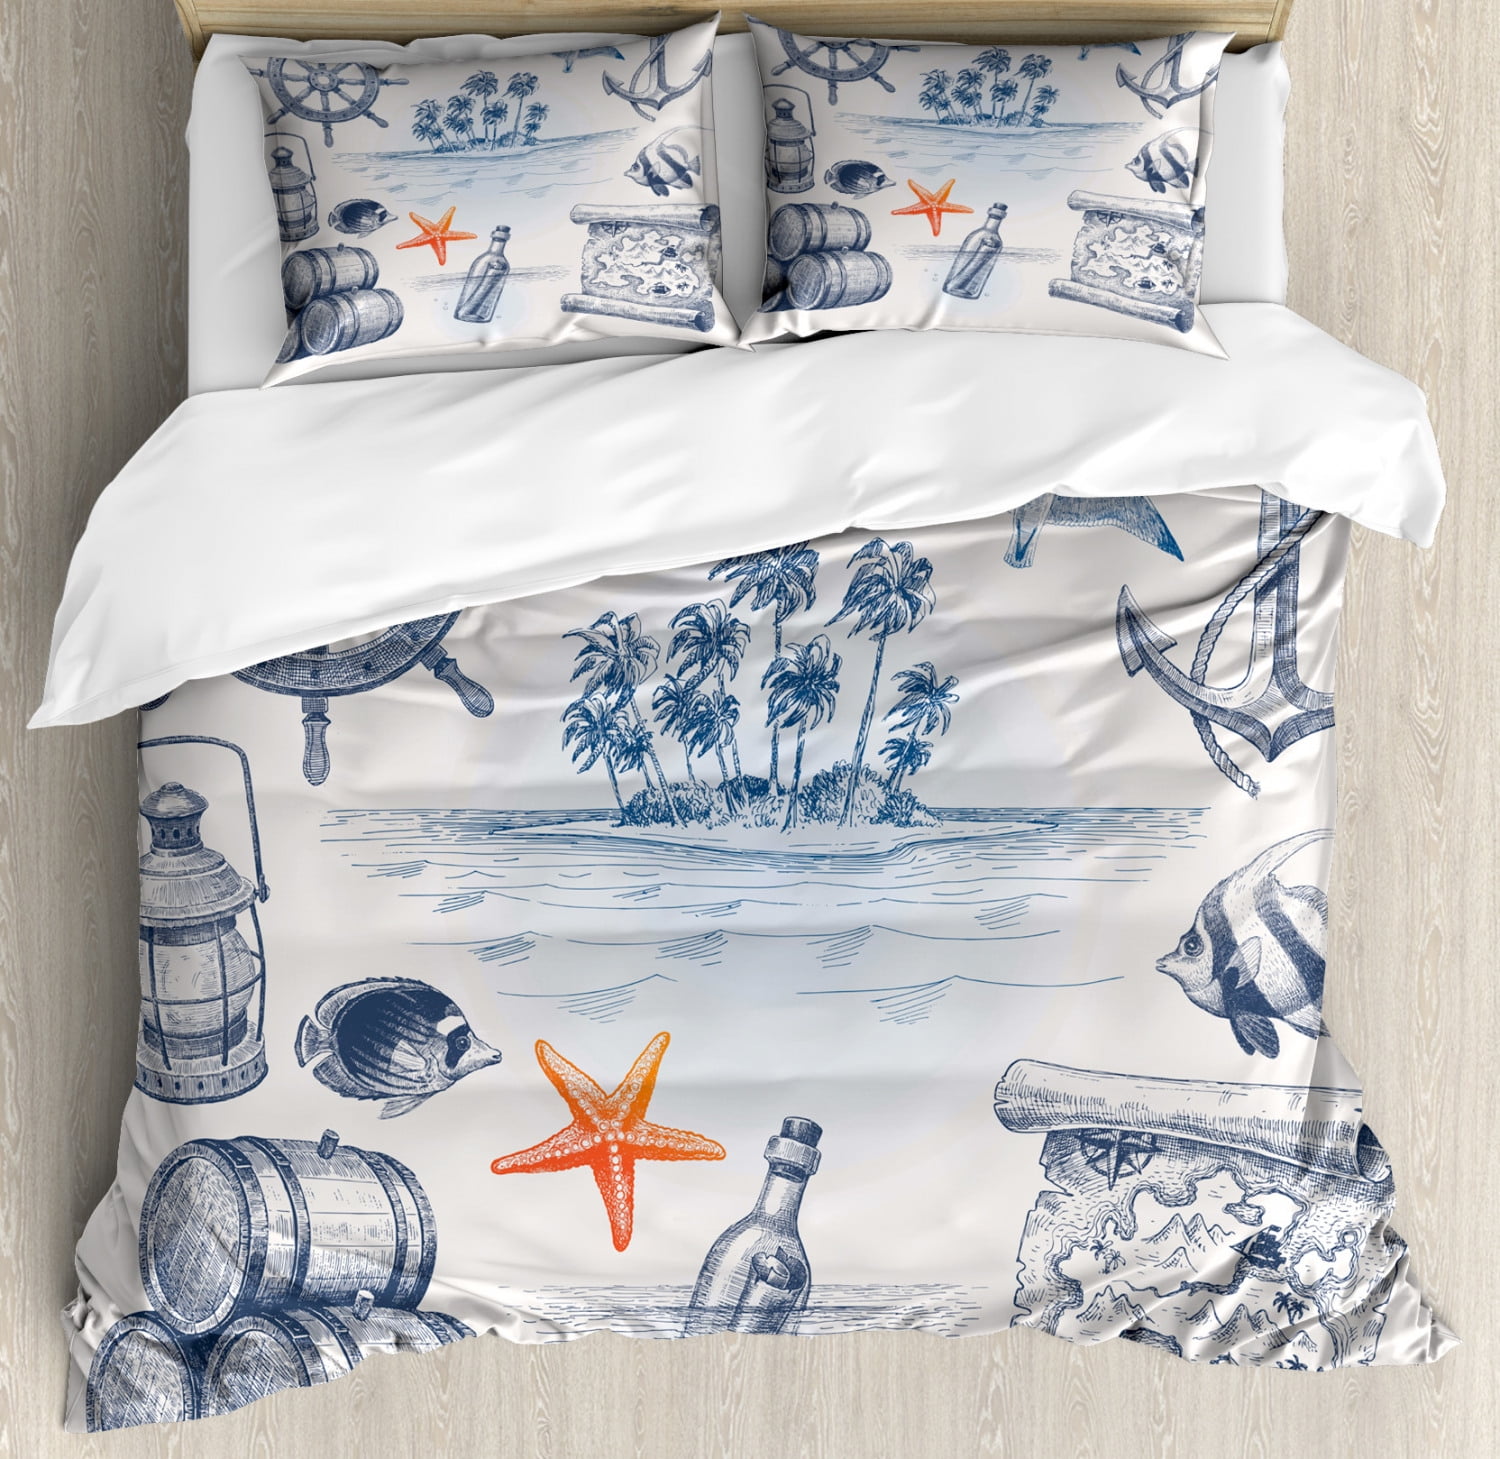 Prime Leader 4 Pcs Bedding Set Punk Steam Airship Duvet Cover Set Ultra Soft and Easy Care Sheet Quilt Sets with Decorative Pillow Covers for Children Kids Adults Twin Size 